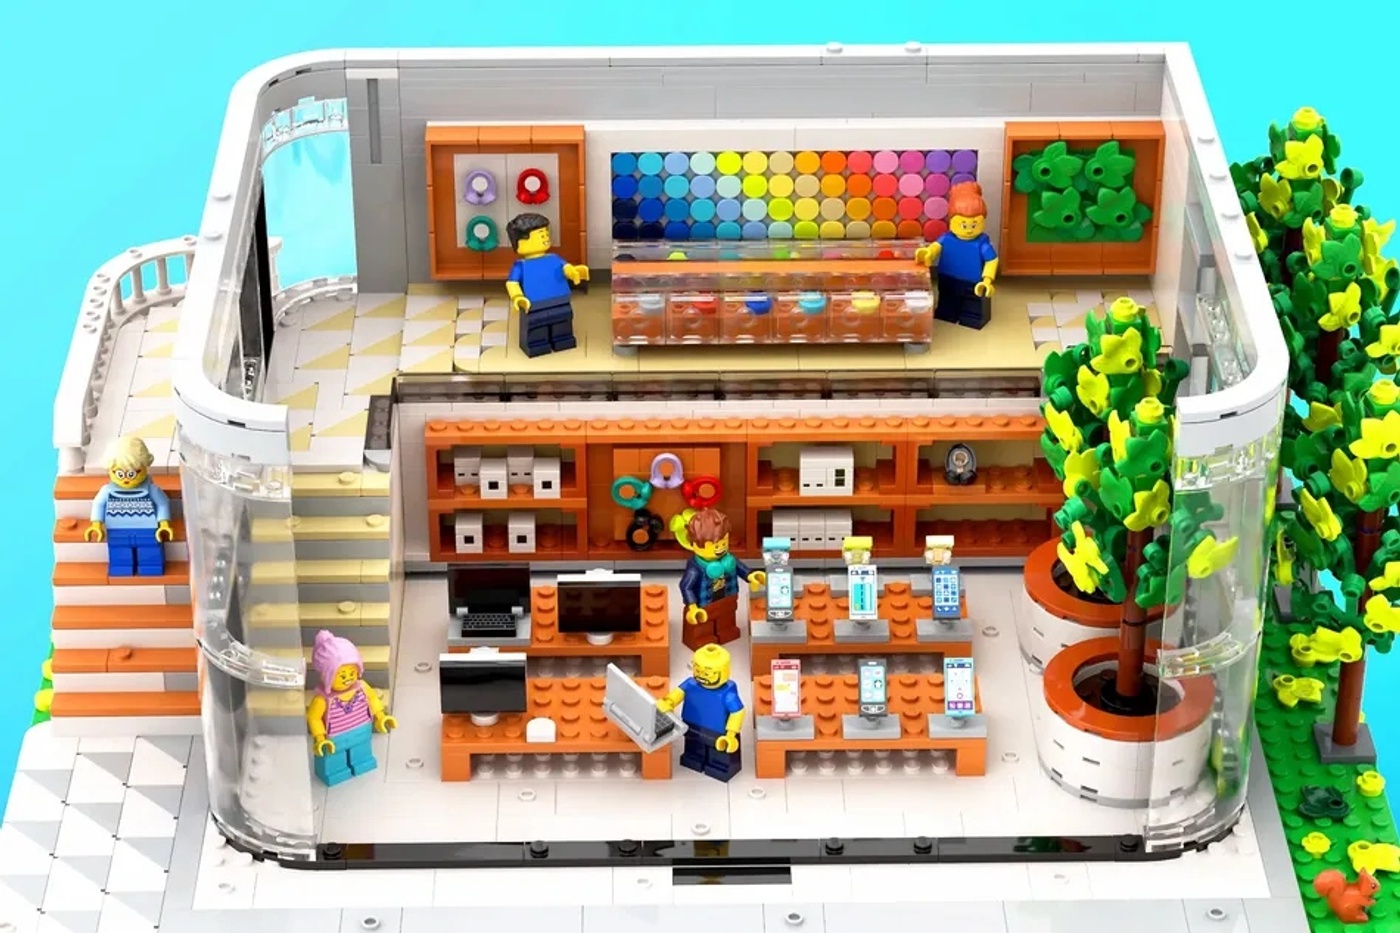 New LEGO Set: Apple Store Concept, Fully Equipped From iPhones to Employees!